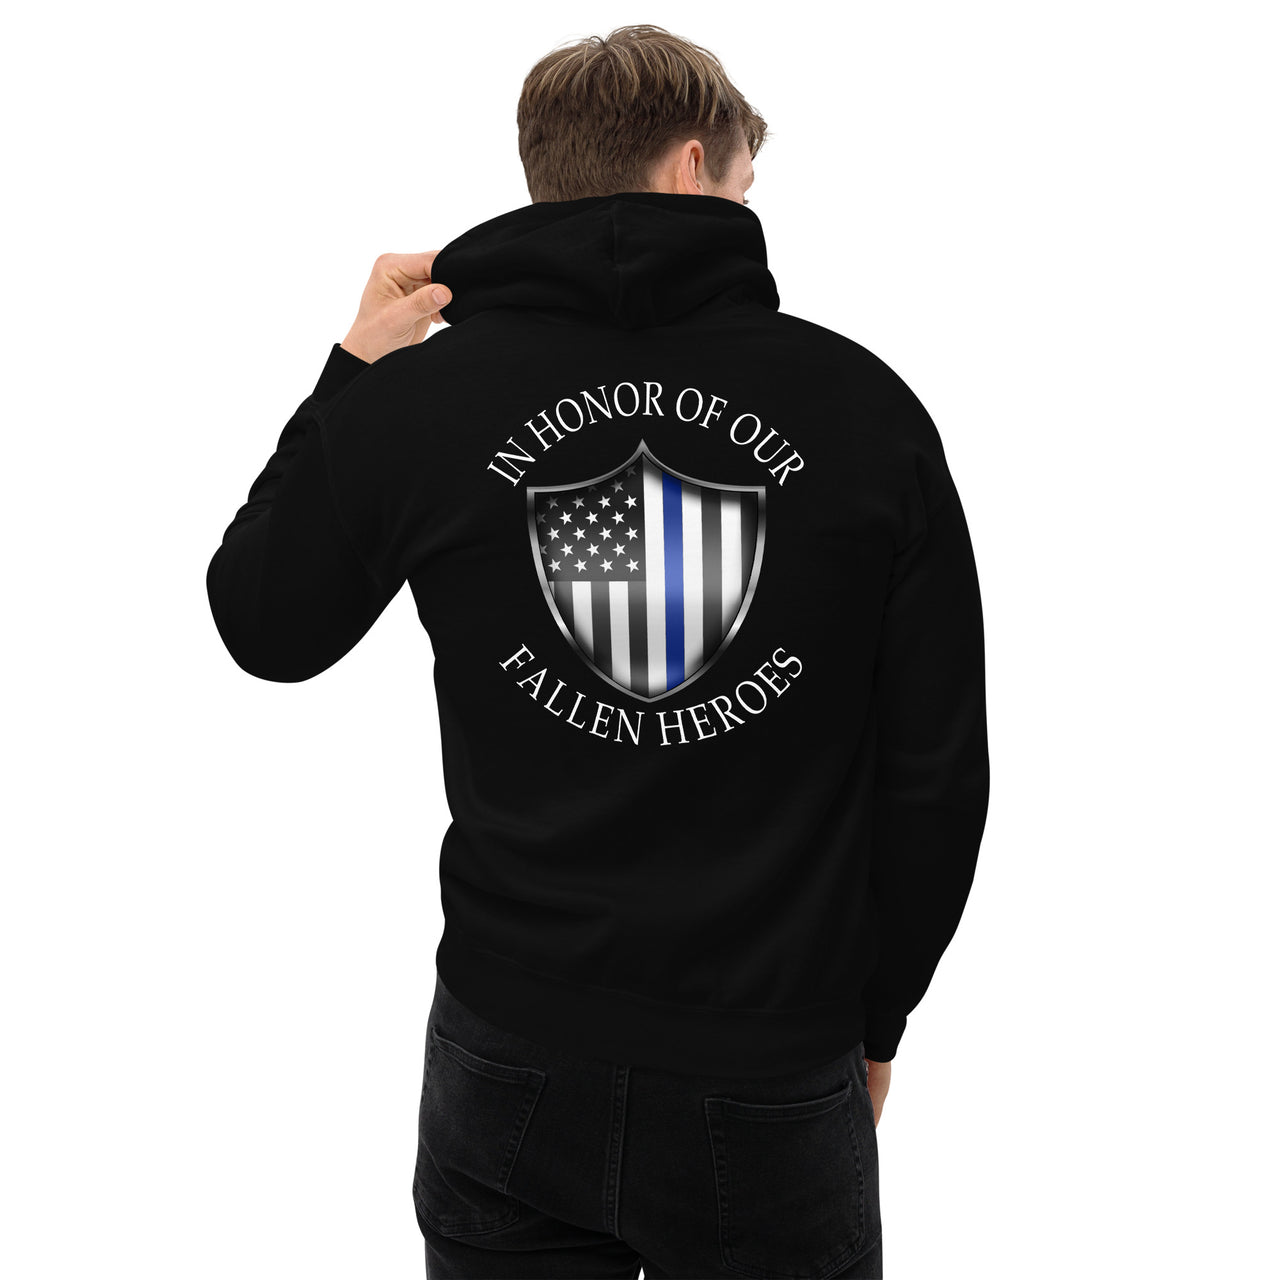 Police Thin Blue Line Hoodie modeled in black back